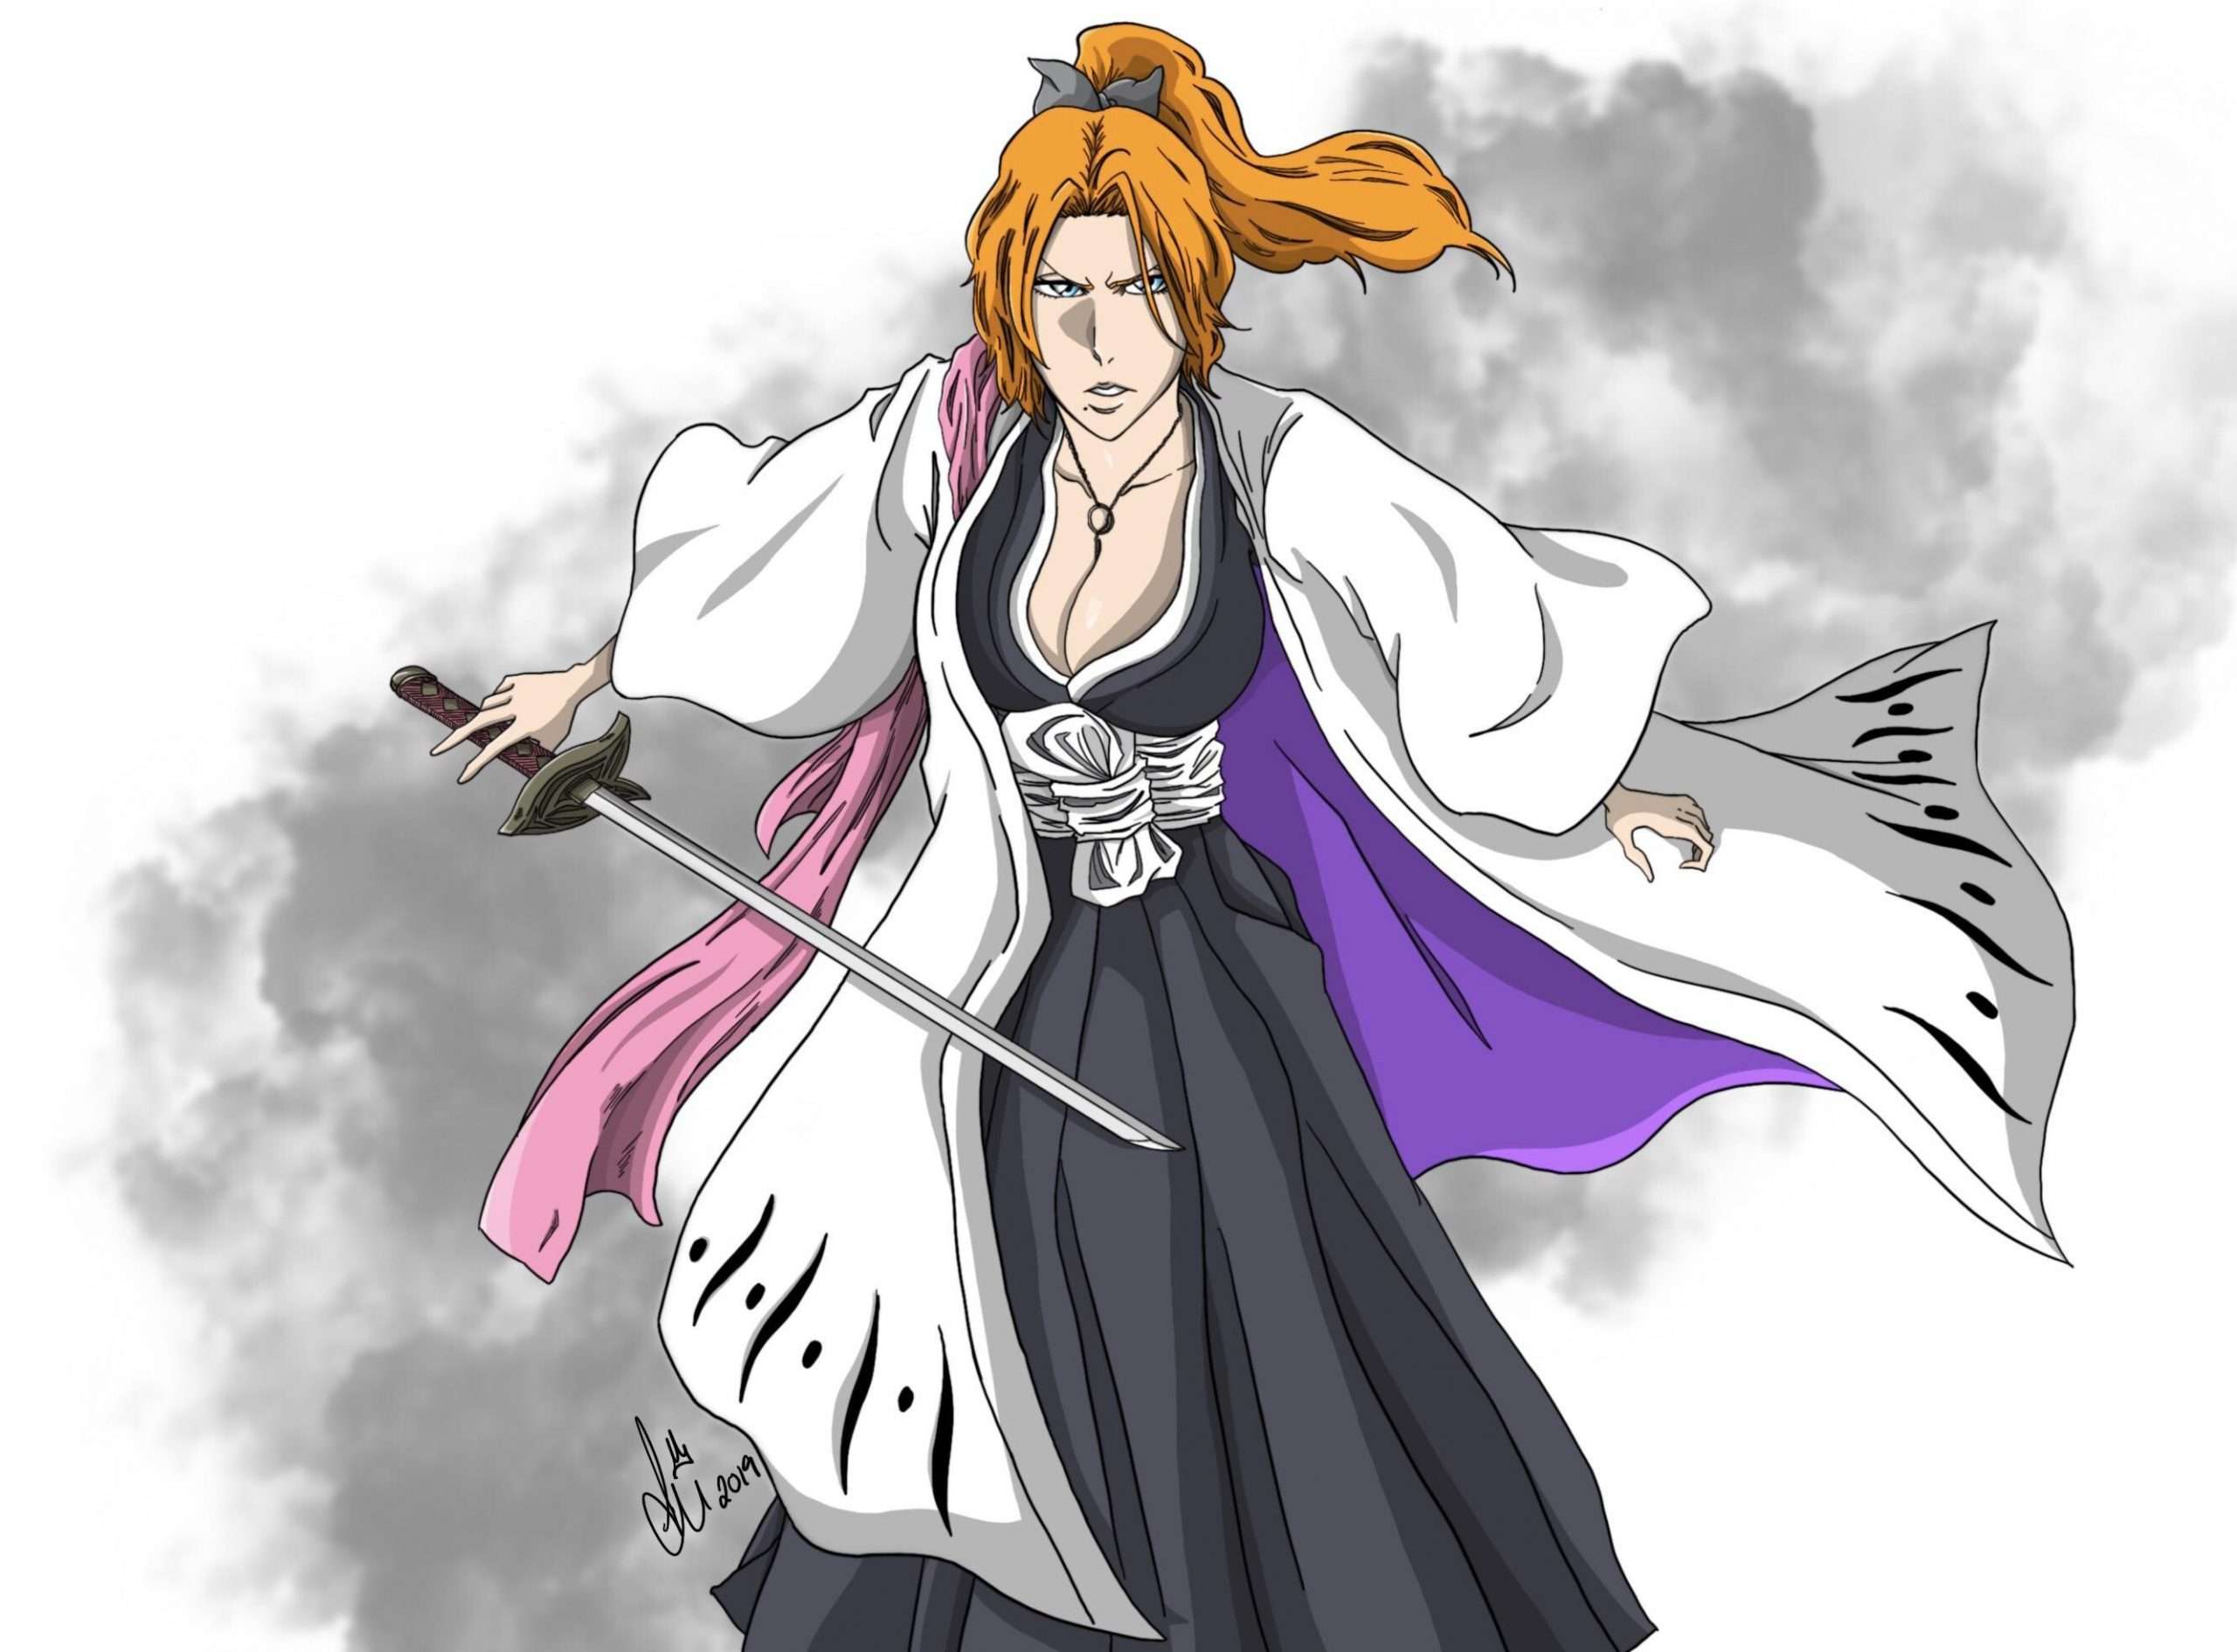 55+ Hot Pictures Of Rangiku Matsumoto From The Bleach Anime Are Really Mesmerising And Beautiful | Best Of Comic Books